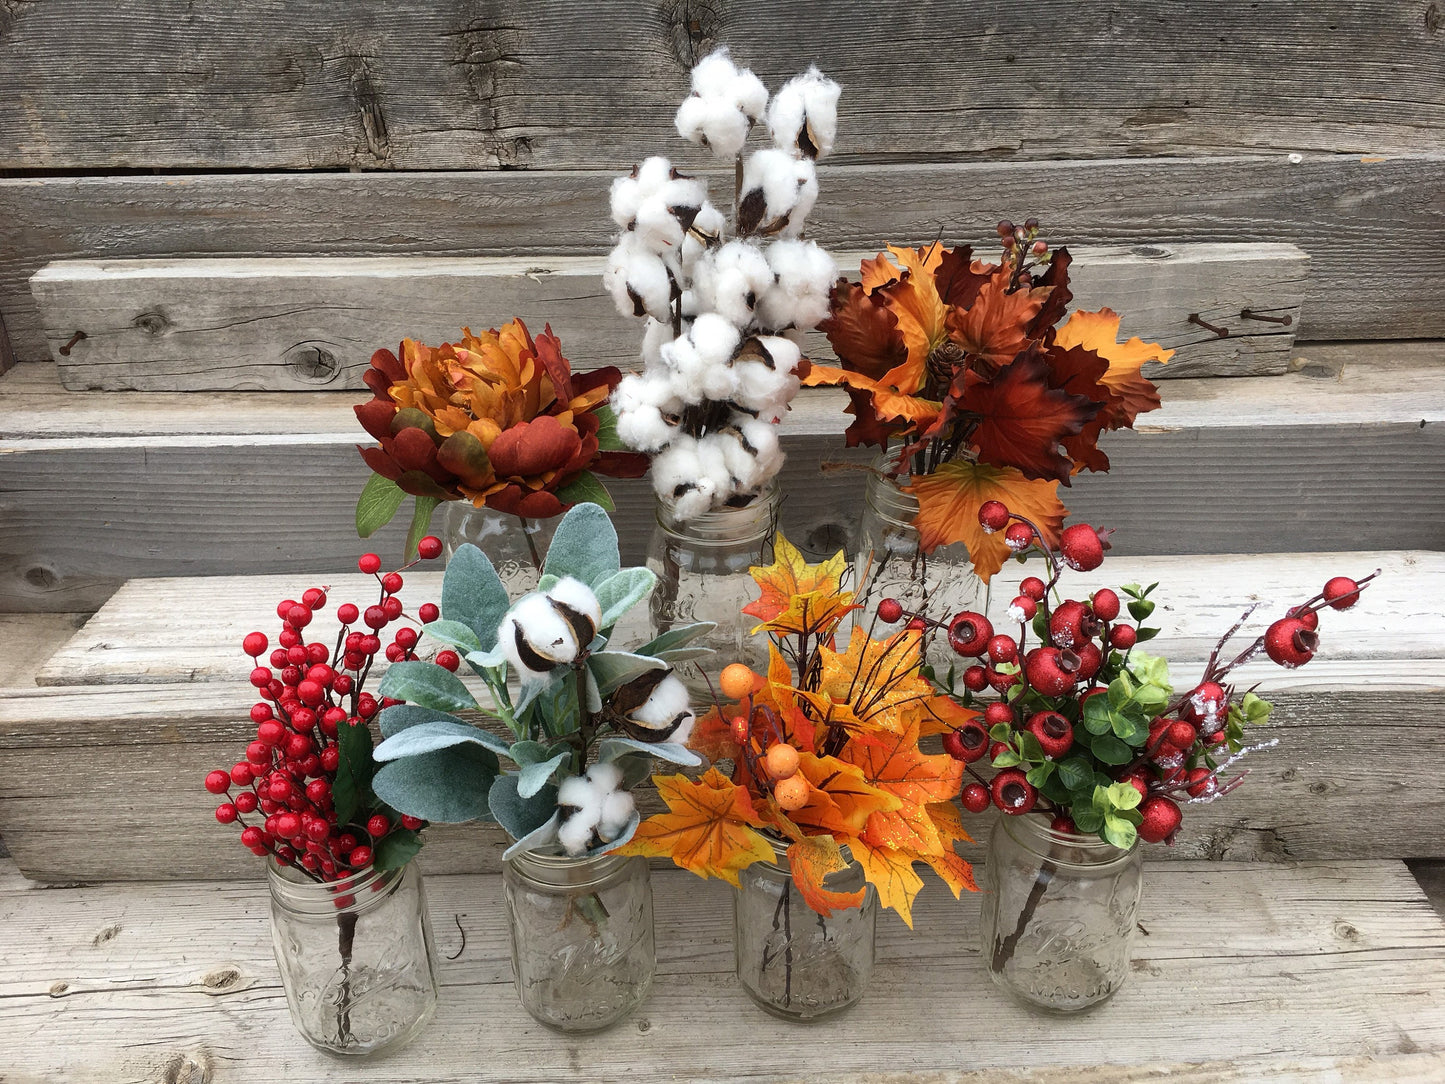 New Seasonal Bouquet Options!! Add on Flowers, Cotton Stems, Christmas Berries, Lambs Ears with Cotton Bolls, Fall Leaves, Fall Flowers